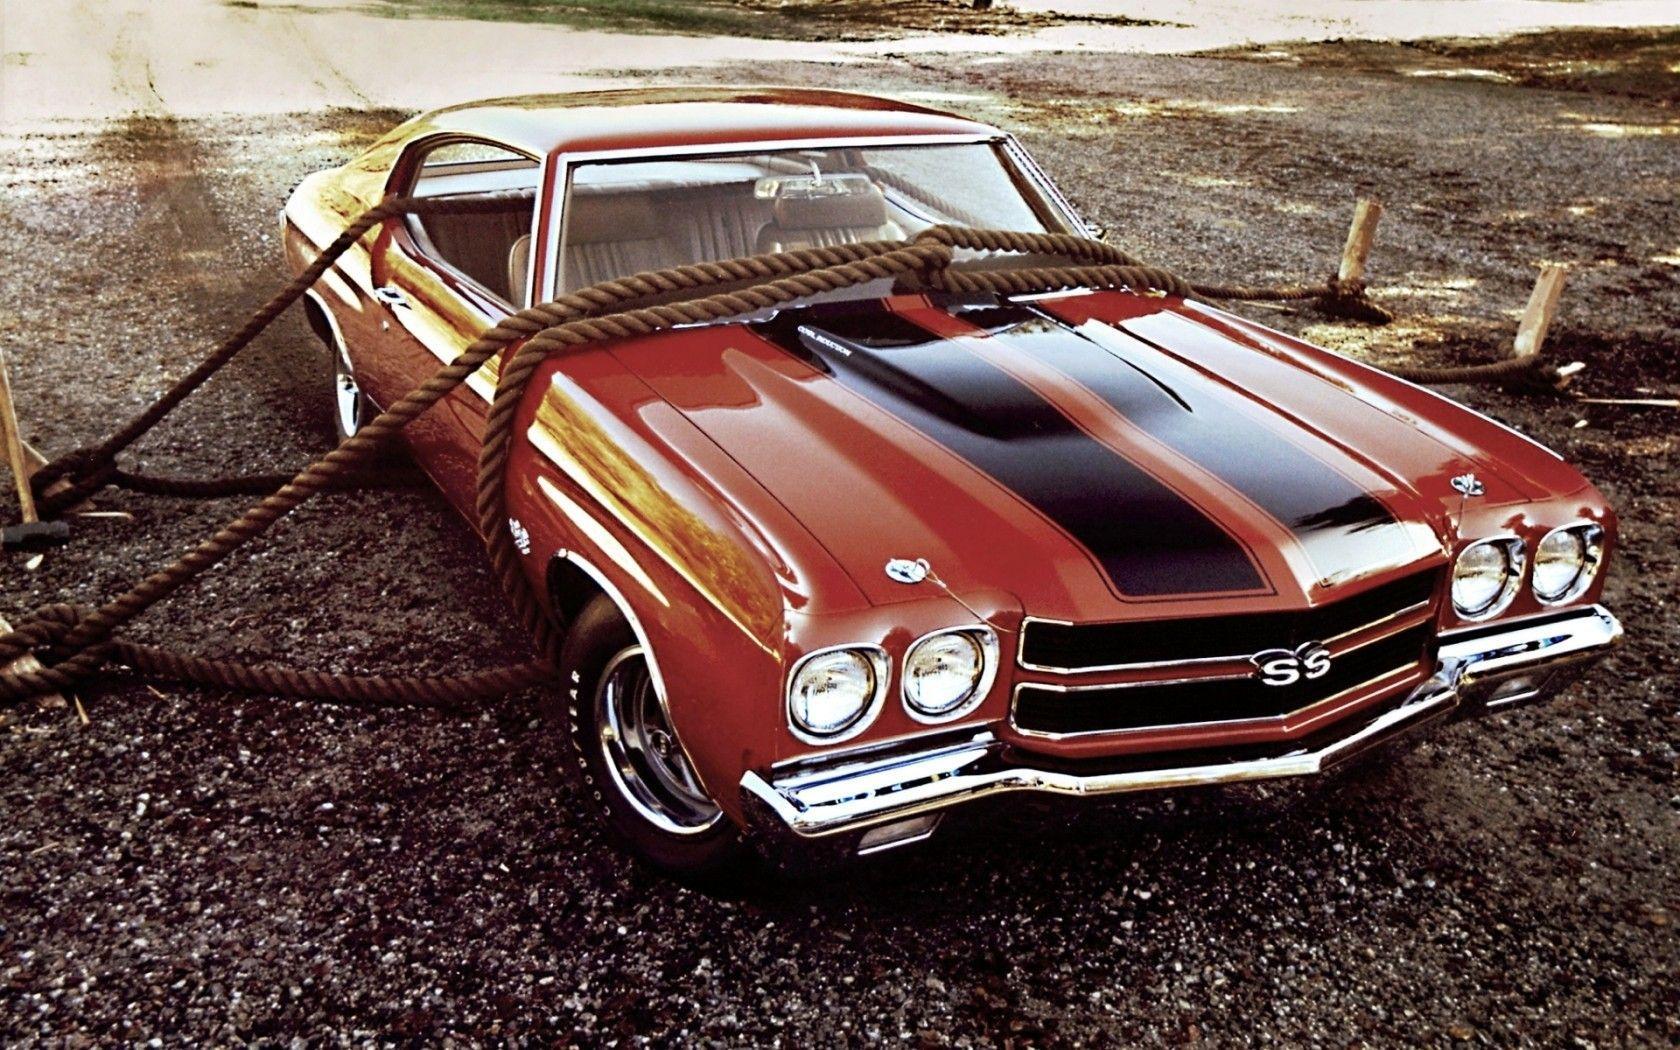 Chevrolet Chevelle SS Wallpaper and Background Imagex1050